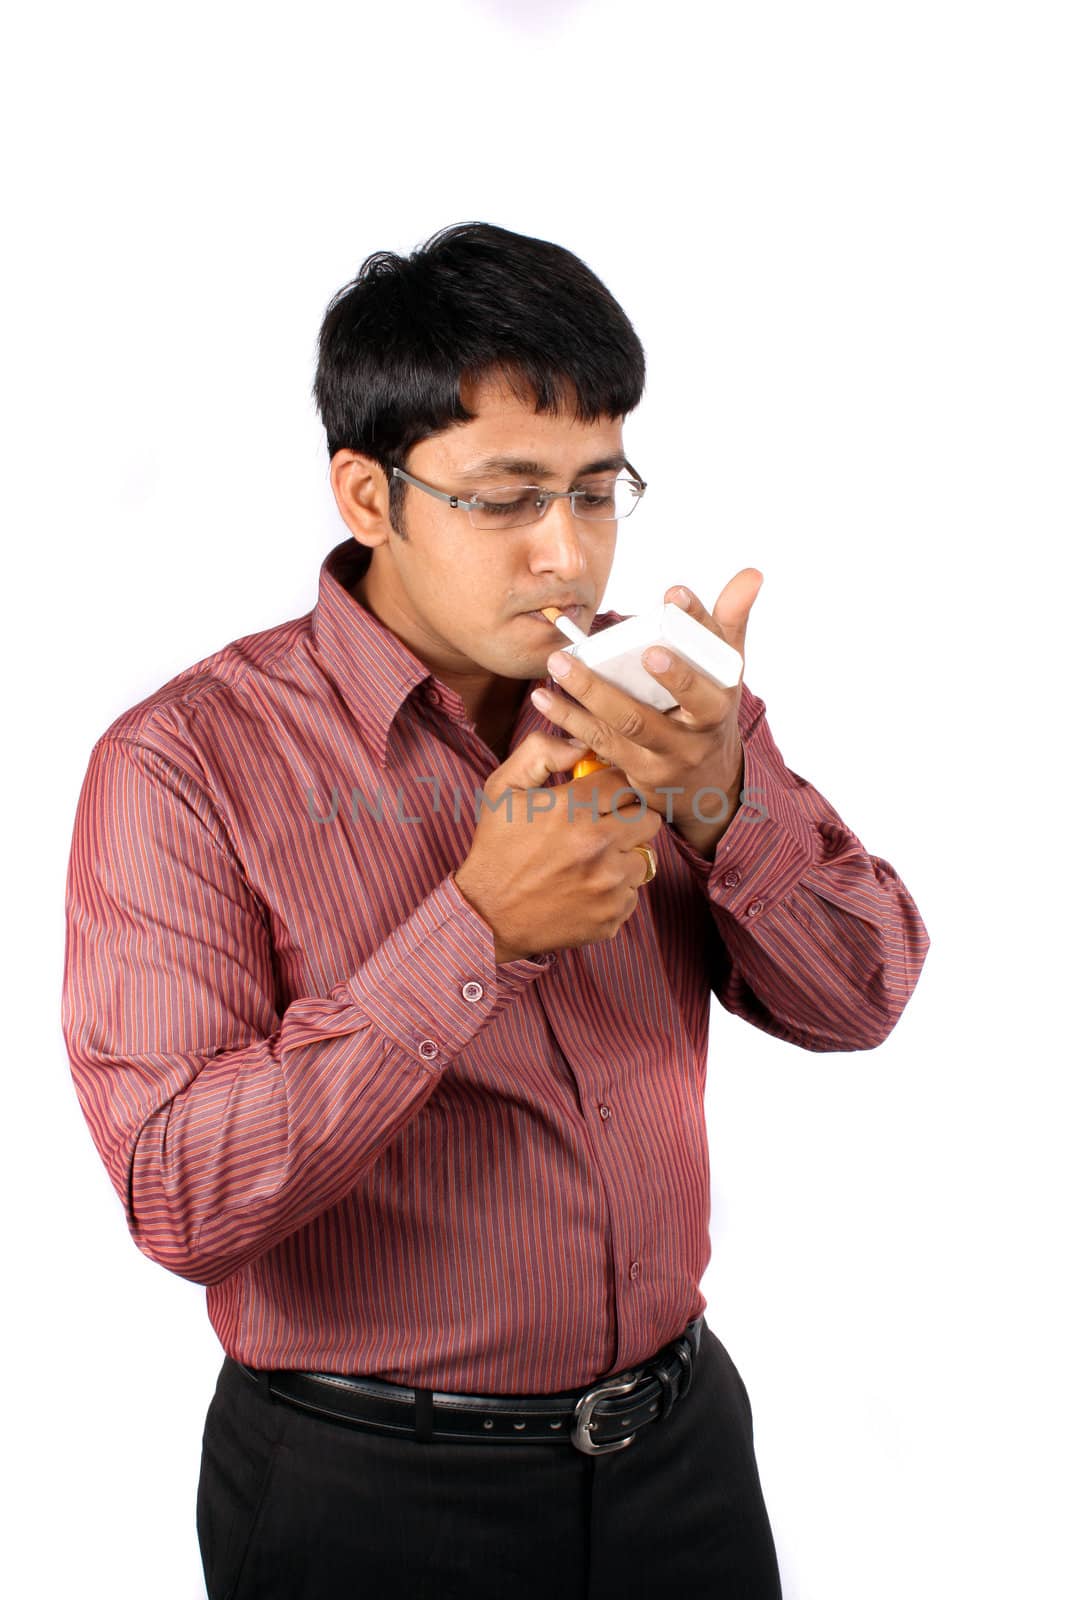 An Indian businessman lighting a cigarette, isolated on white studio background.